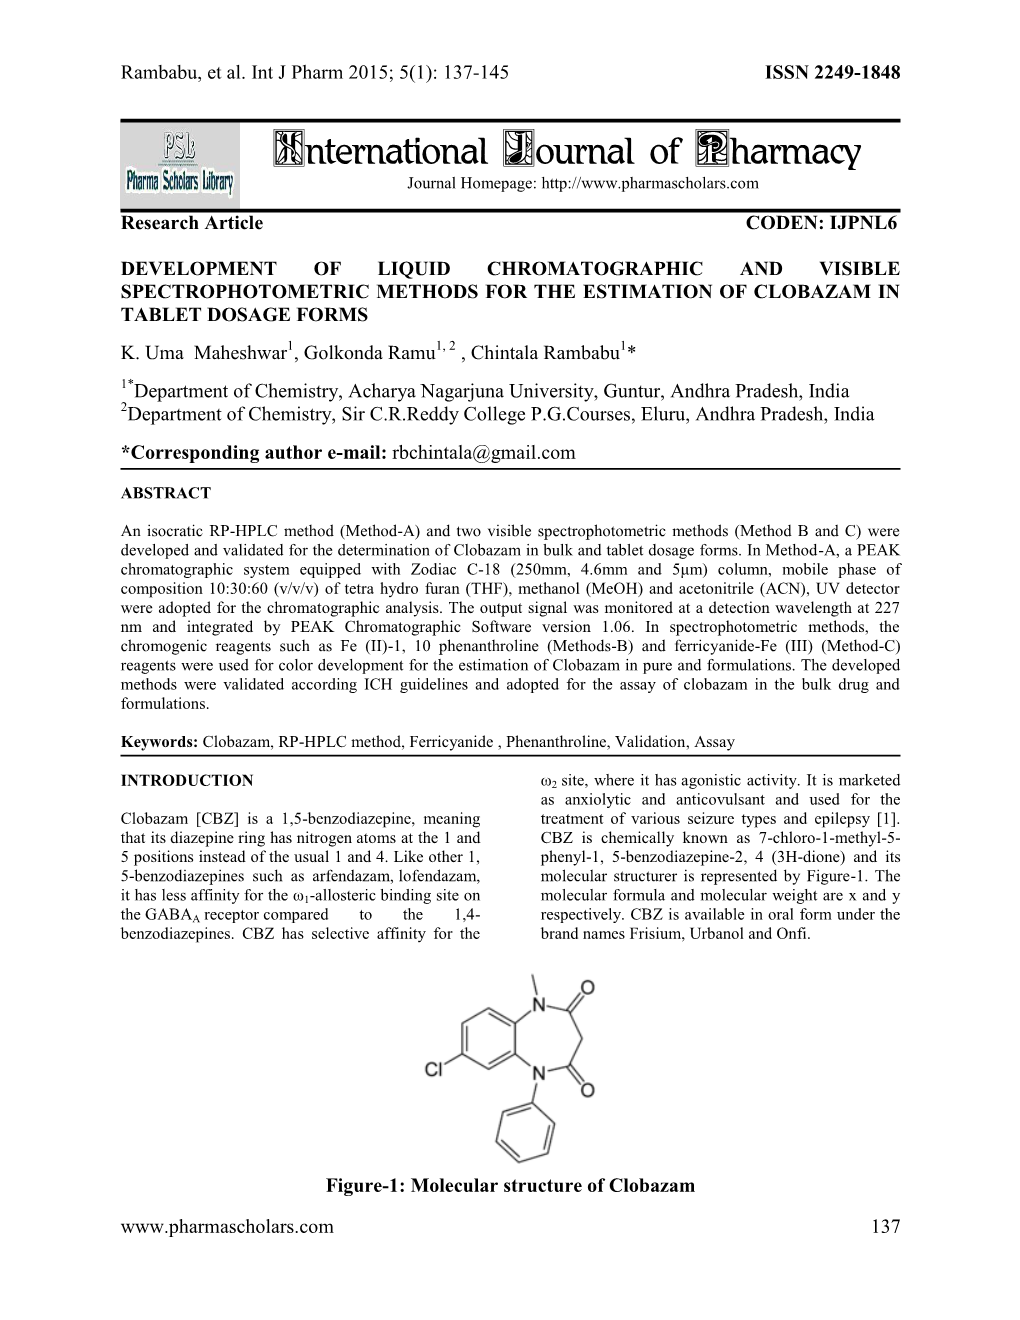 Development of Liquid Chromatographic and Visible Spectrophotometric Methods for the Estimation of Clobazam in Tablet Dosage Forms